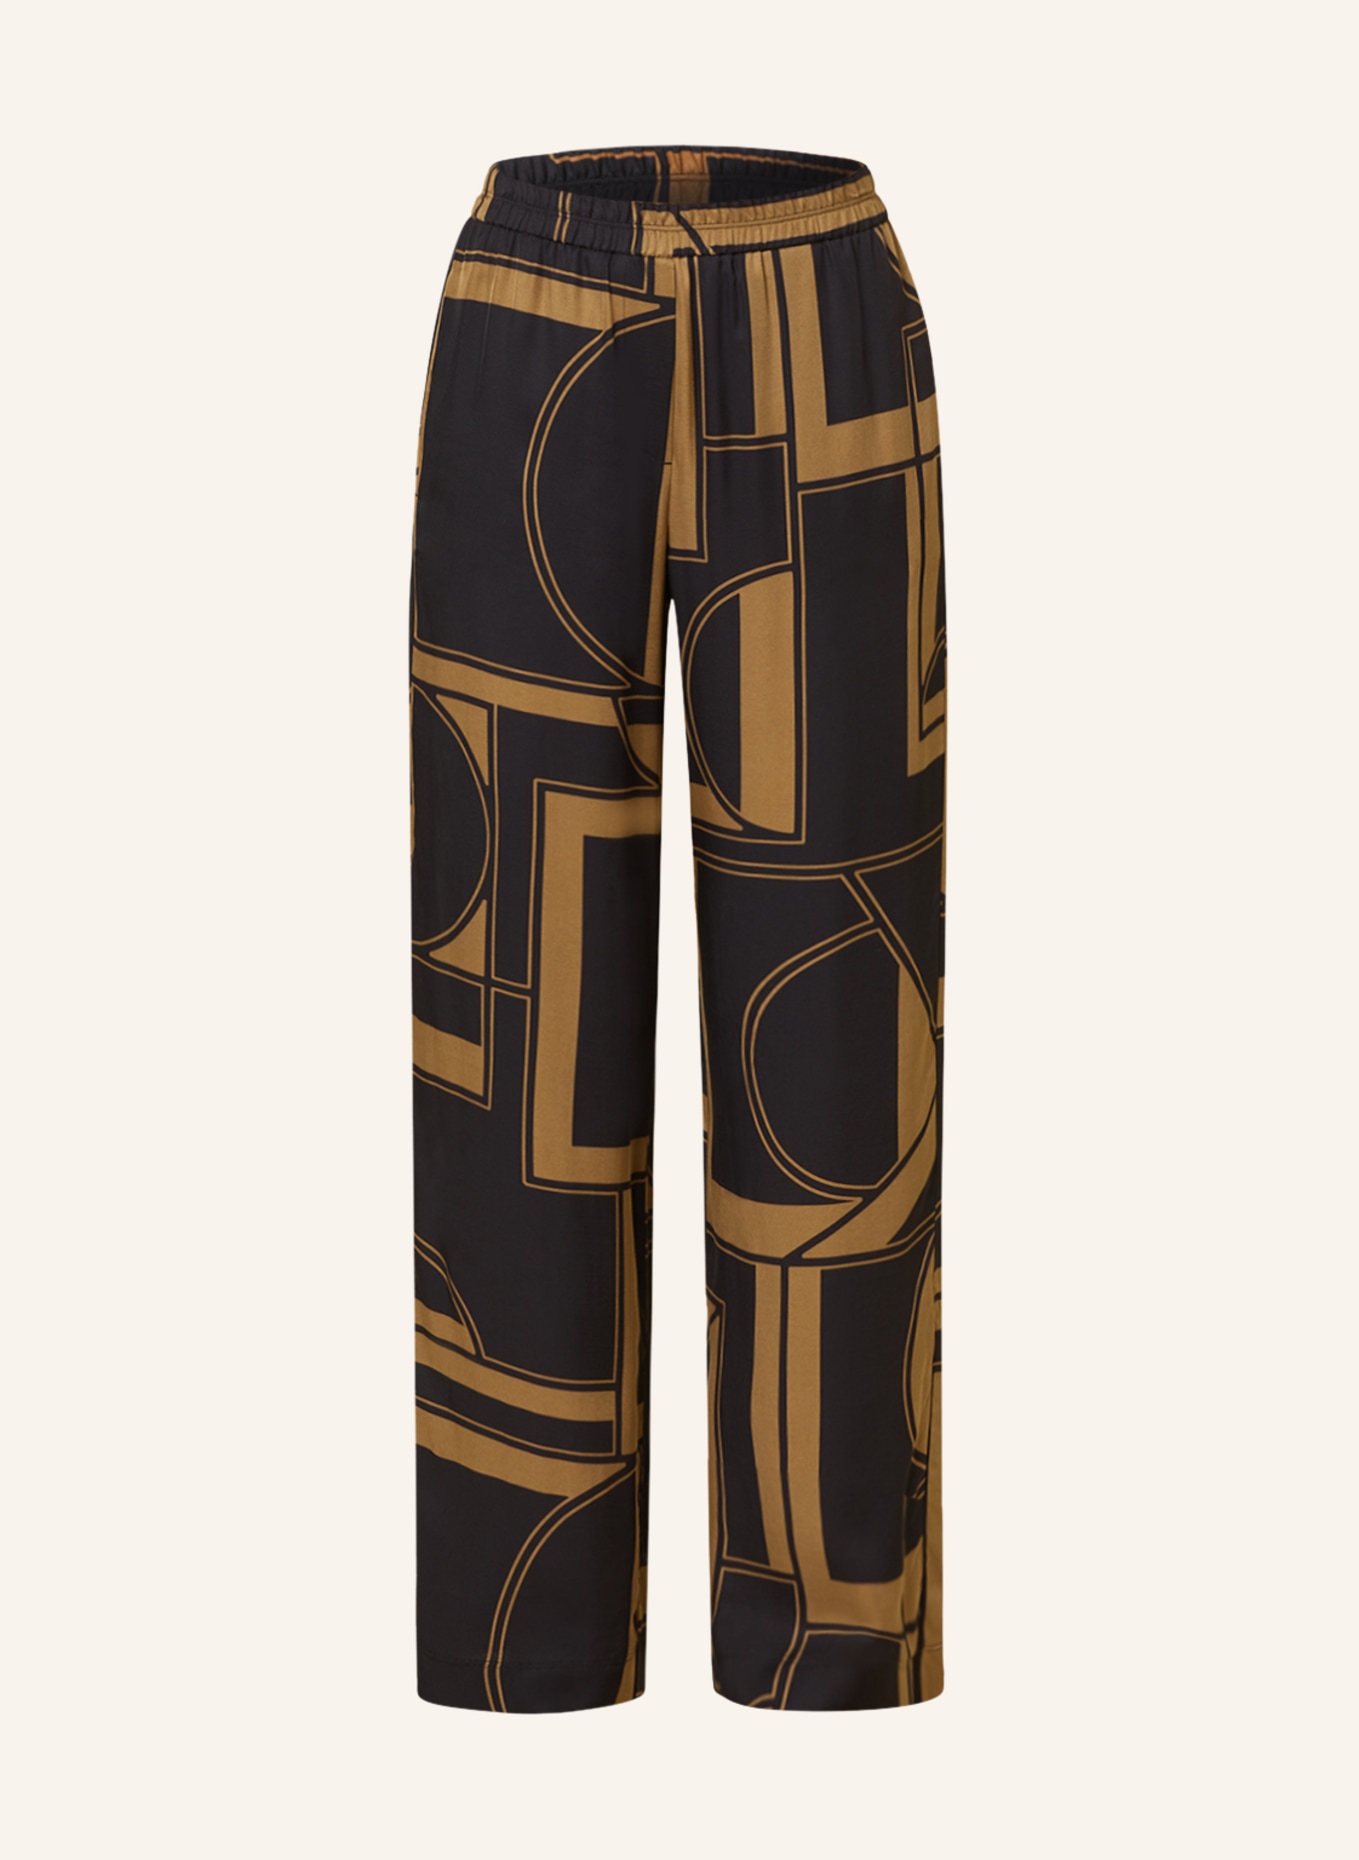 Marc O'Polo Wide leg trousers, Color: BEIGE/ DARK BROWN (Image 1)